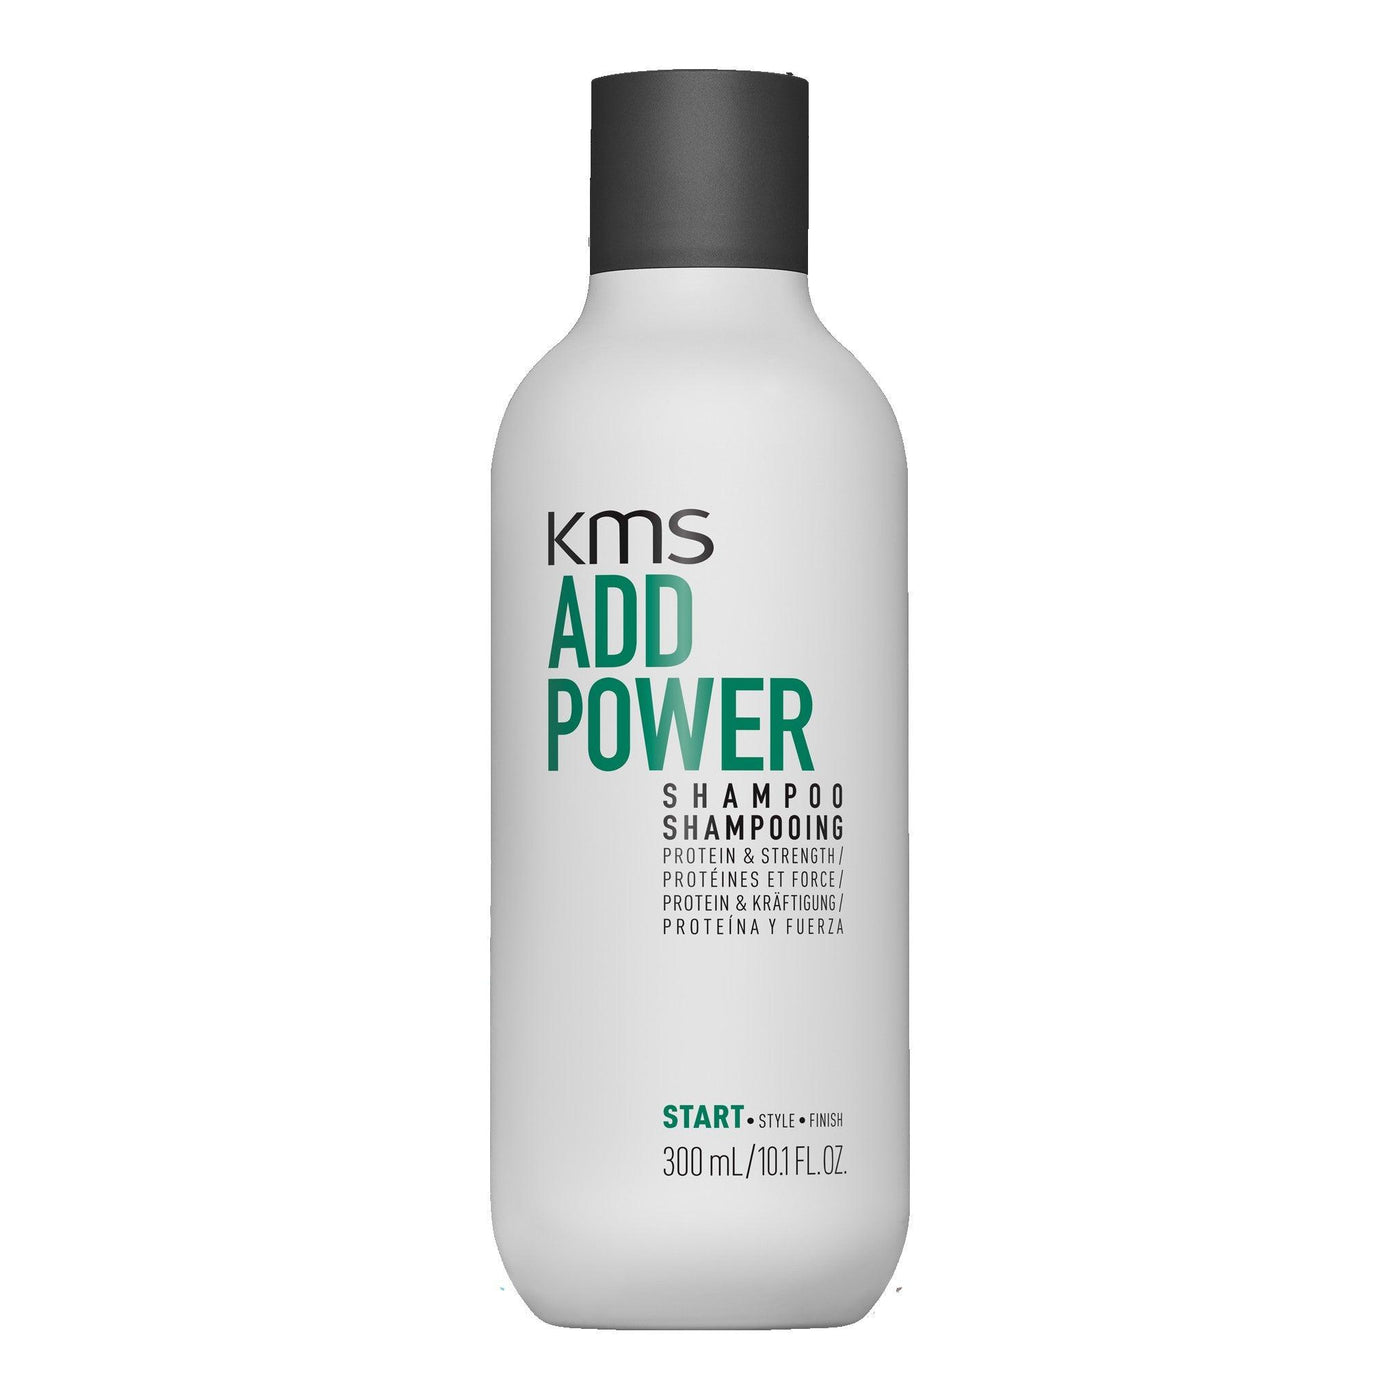 Kms Addpower Shampoo 300ml KMS Boutique Deauville